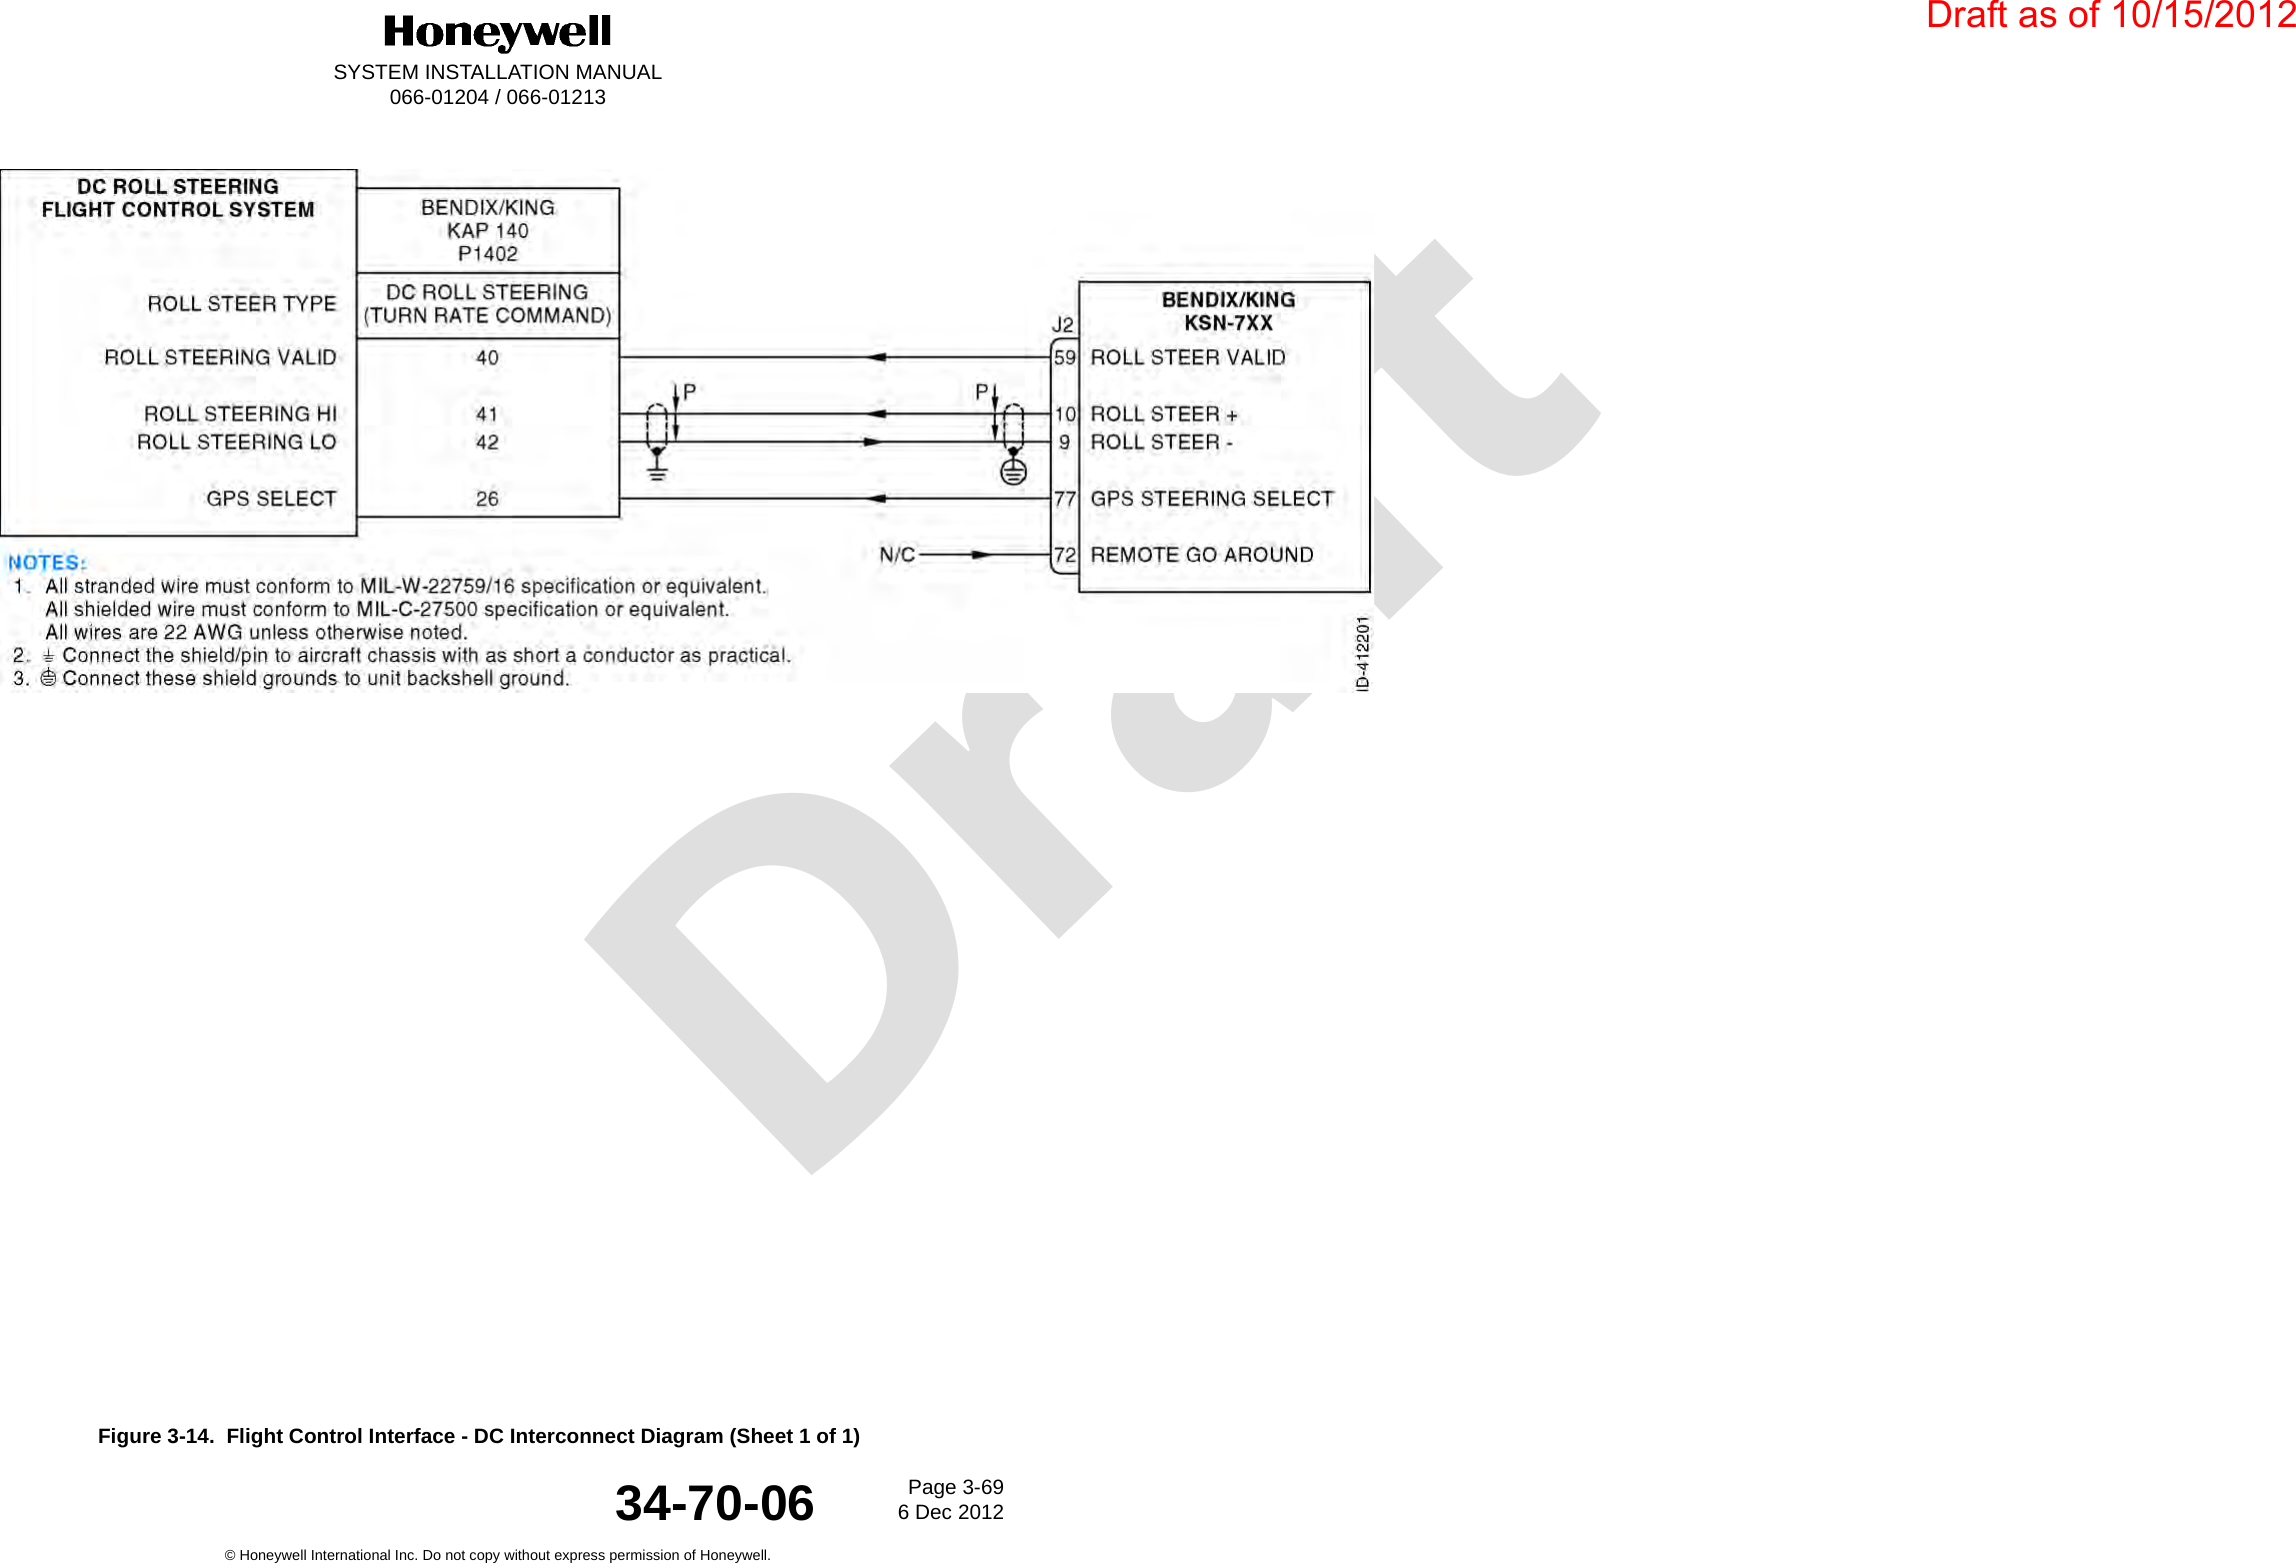 DraftSYSTEM INSTALLATION MANUAL066-01204 / 066-01213Page 3-696 Dec 2012© Honeywell International Inc. Do not copy without express permission of Honeywell.34-70-06Figure 3-14.  Flight Control Interface - DC Interconnect Diagram (Sheet 1 of 1)Draft as of 10/15/2012